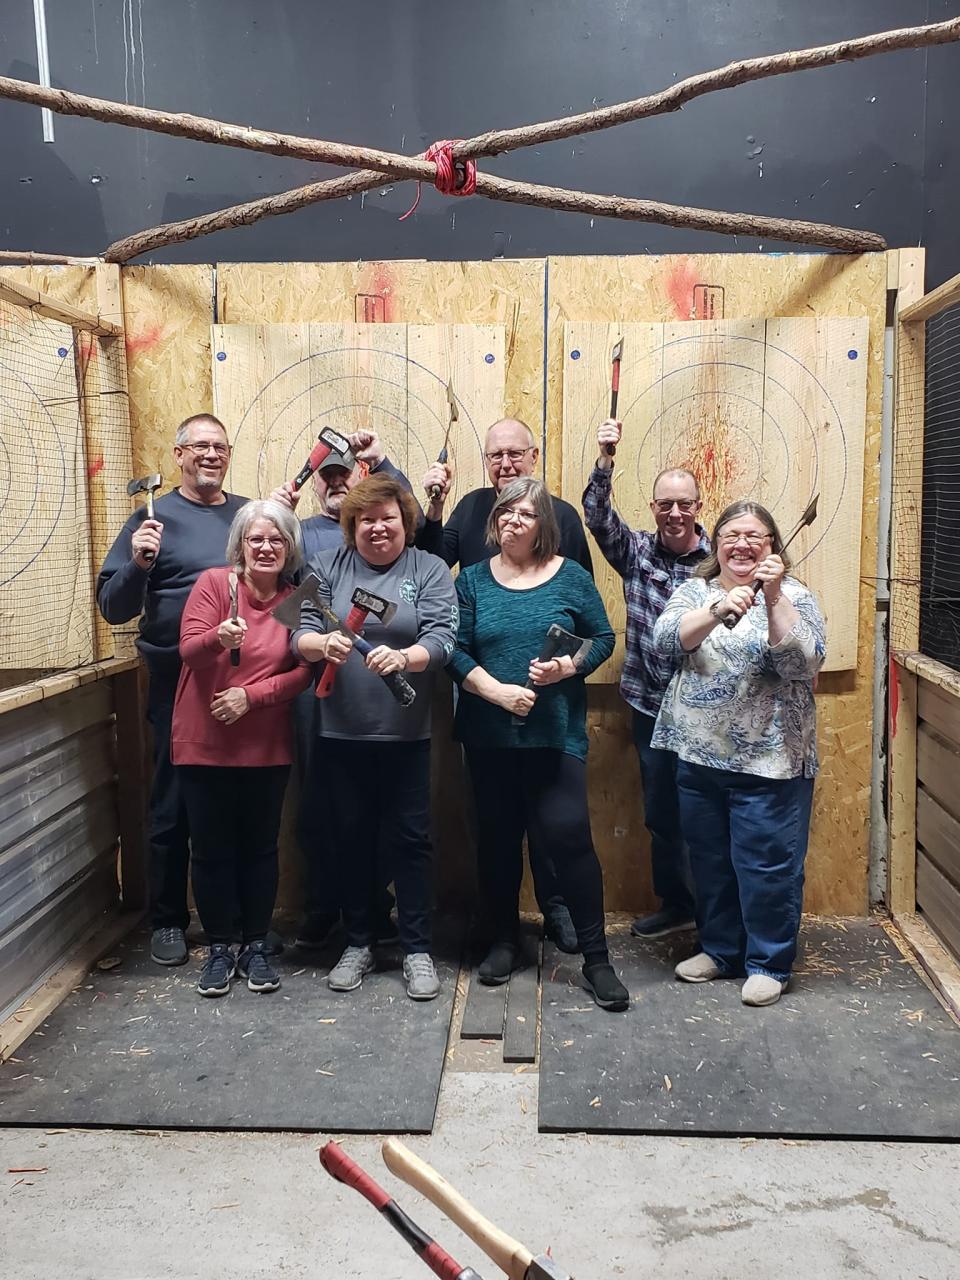 The Angry Axe and Rage Room in Salisbury has seven axe-throwing lanes.